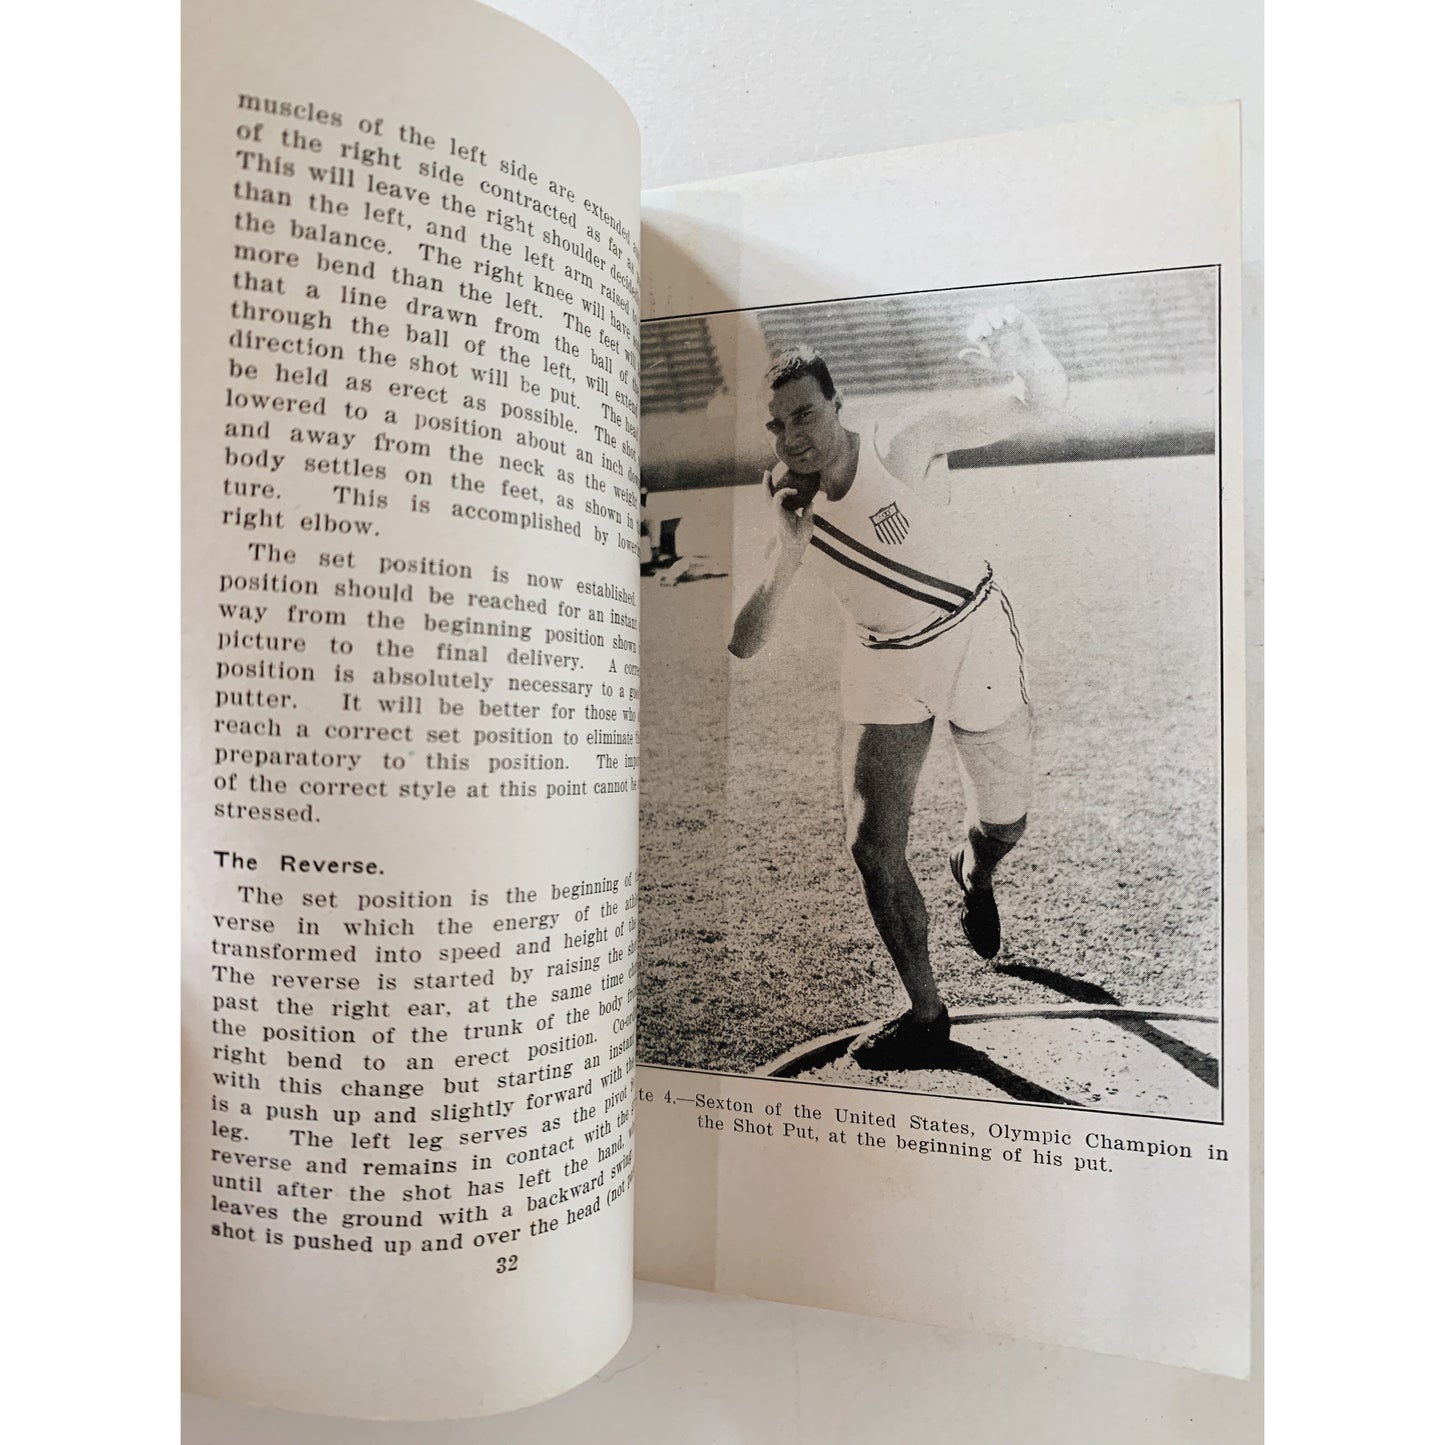 A Practical Handbook on Track and Field Athletics, Gerald Hamilton Ayers, 1933, Rare Hardcover